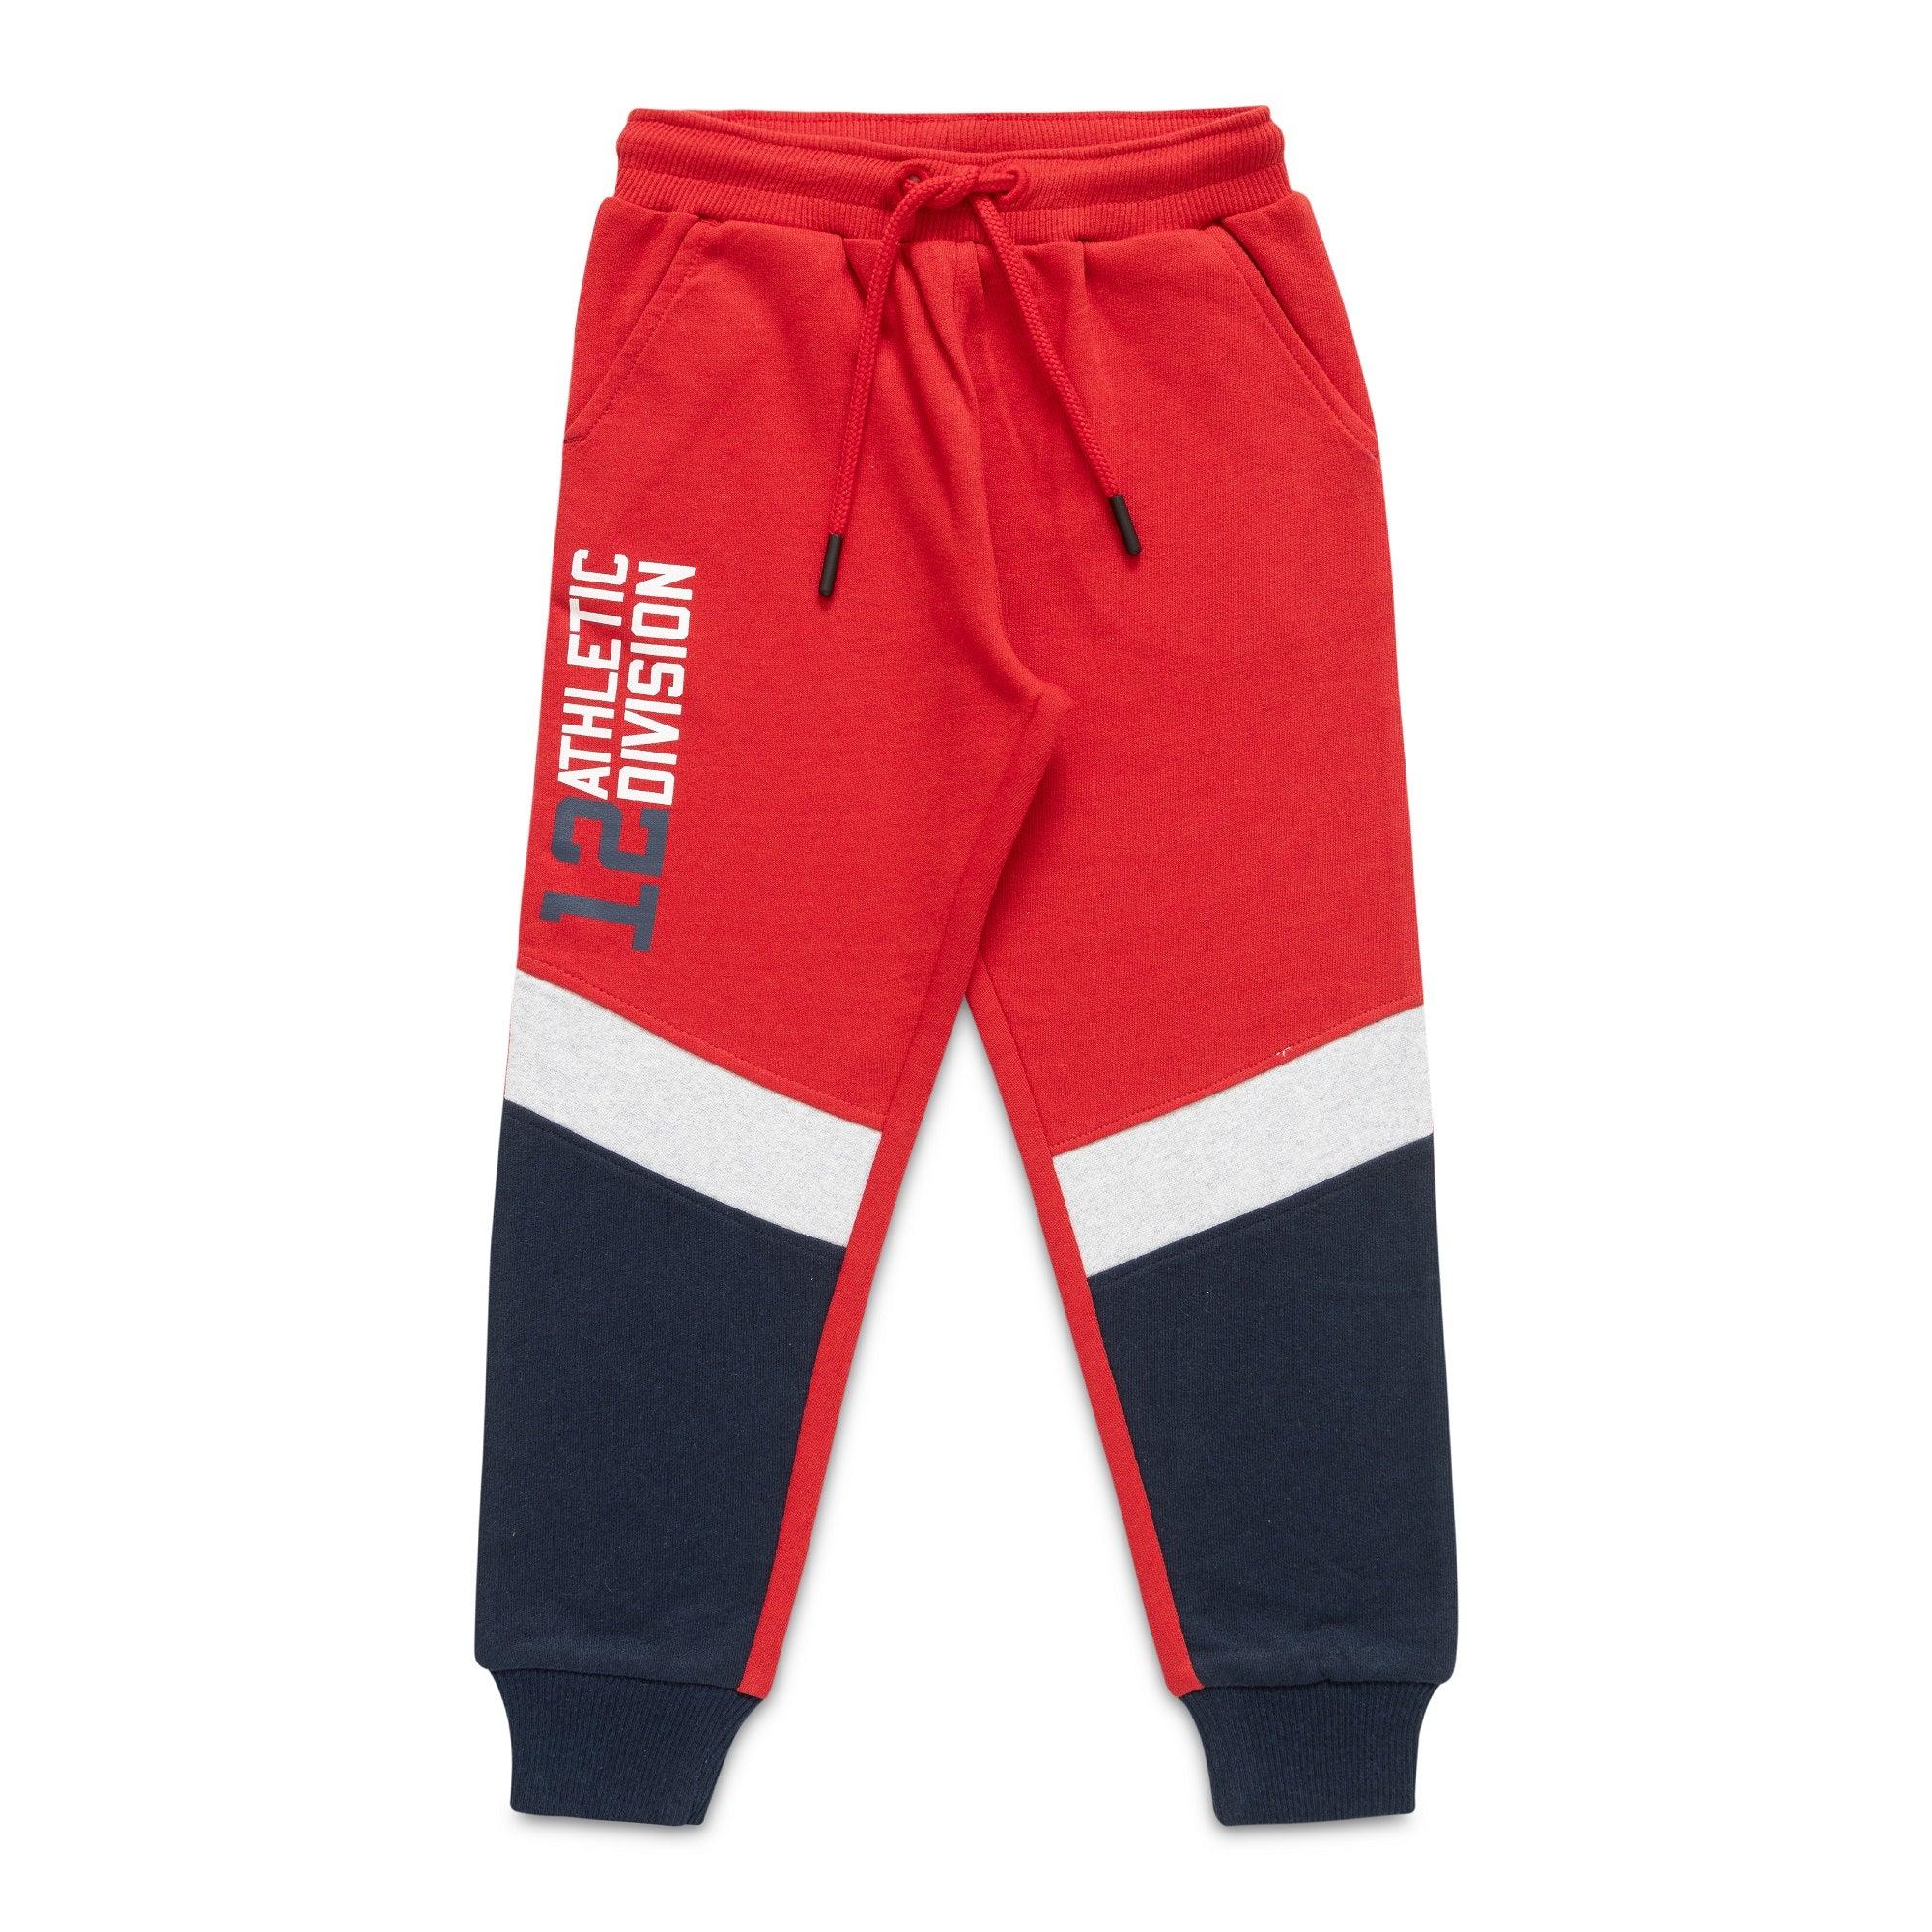 Young Boys Cut & Sew Printed Bio Washed Track Pants Combo Pack - Juscubs